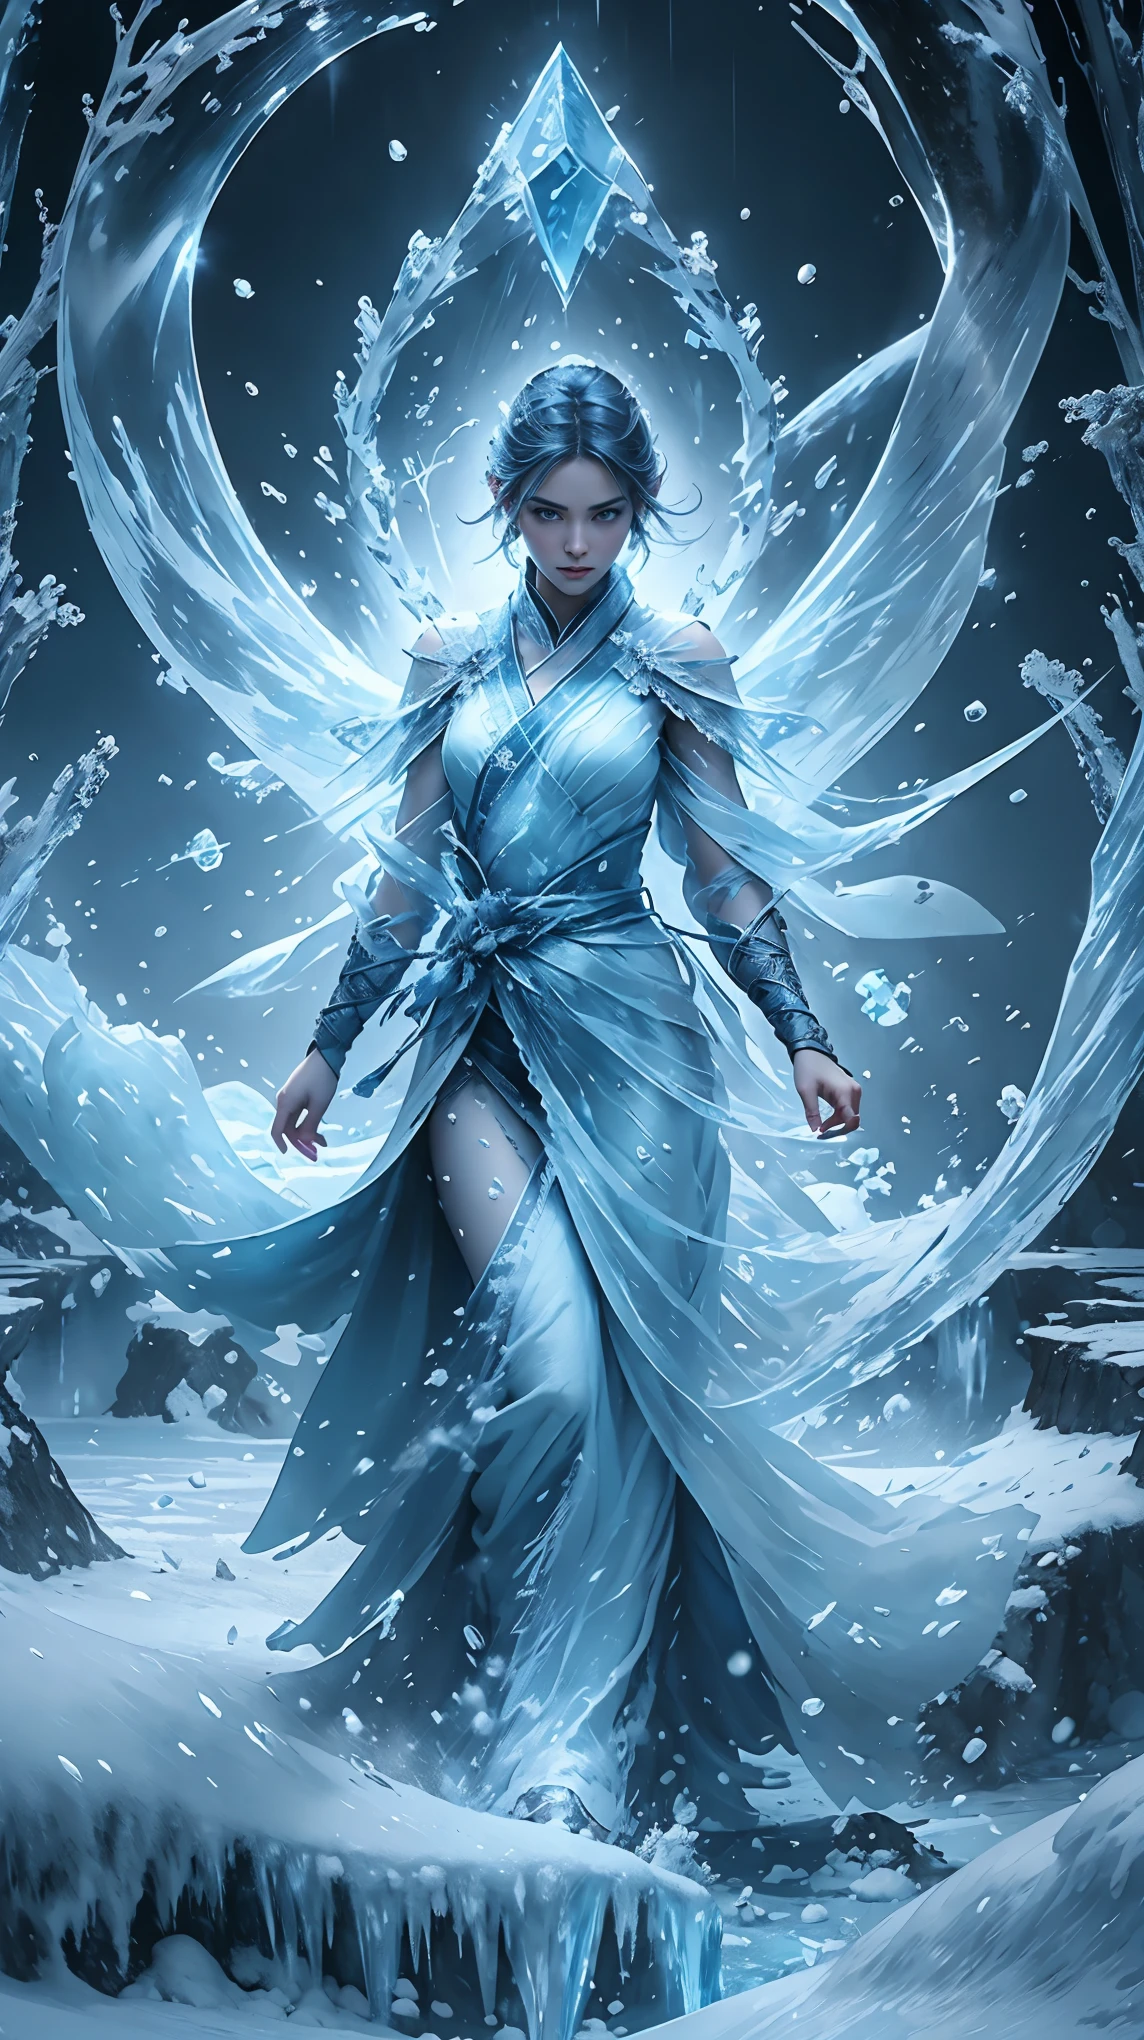 (((1 girl)))，imperial water，magician，（loose dress：1.5），（perfect facial features：1.4），（blue silk robe），（Mysterious magic array：1.2），Blue glow，（Frost Wings），(((Powerful ice magic)))，(((icicle)))，Towering above the wind，Blue light cold light，(((Ice storms)))，wind，((Flying snow ice and snow))，Amazing results，,best quality,masterpiece,ultra high resolution,detailed,intricate details,8k resolution,8KUCG wallpaper,high dynamic range,Aqua blue,magic circle,Cinema-level lighting effects,chiaroscuro，Ray tracing、NVIDIA RTX